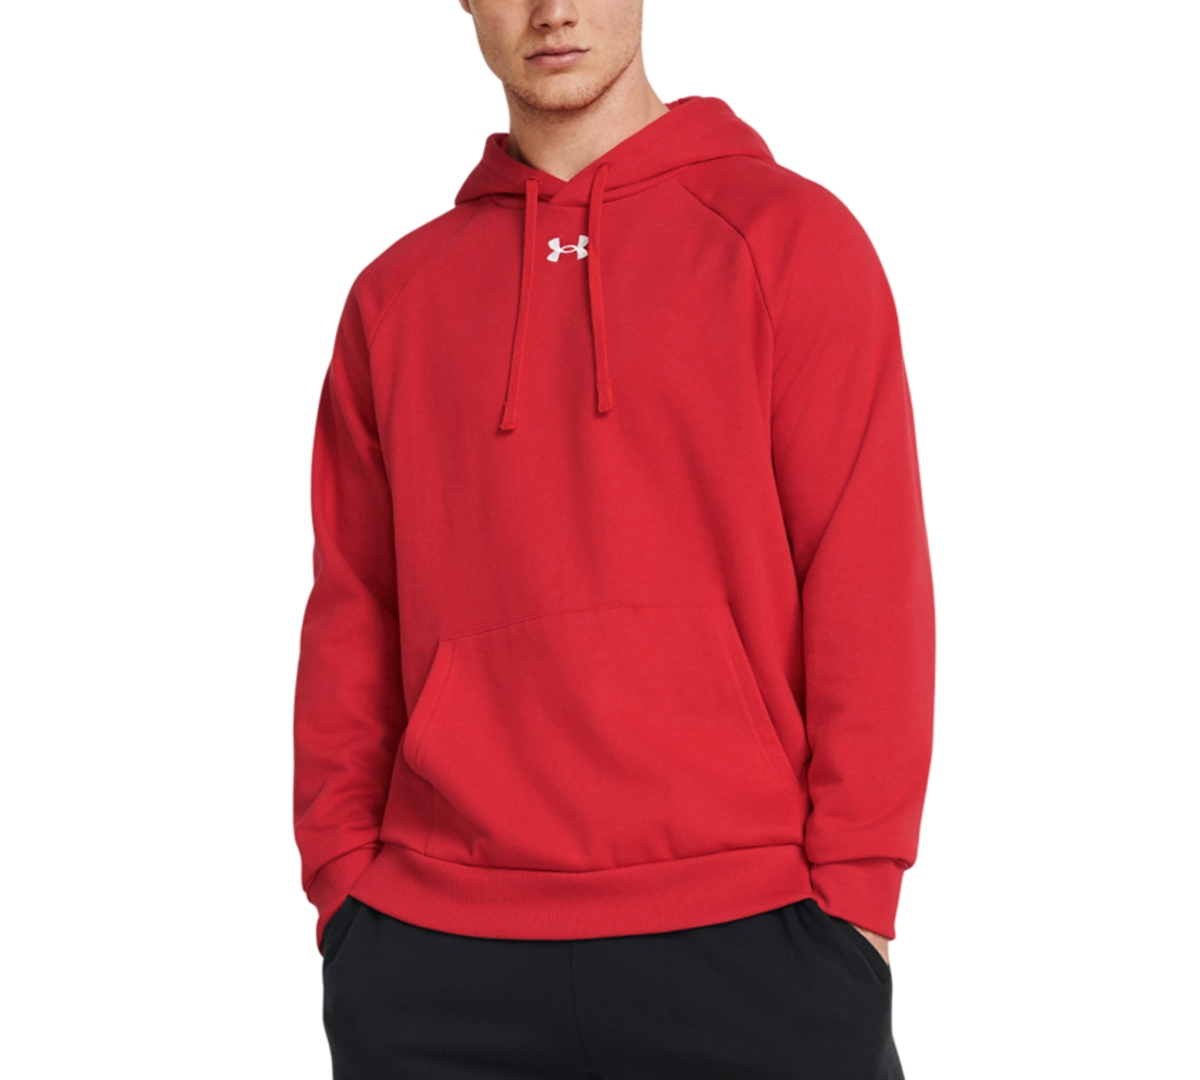 Under Armour Men's Rival Logo Embroidered Fleece Hoodie In Red,wht